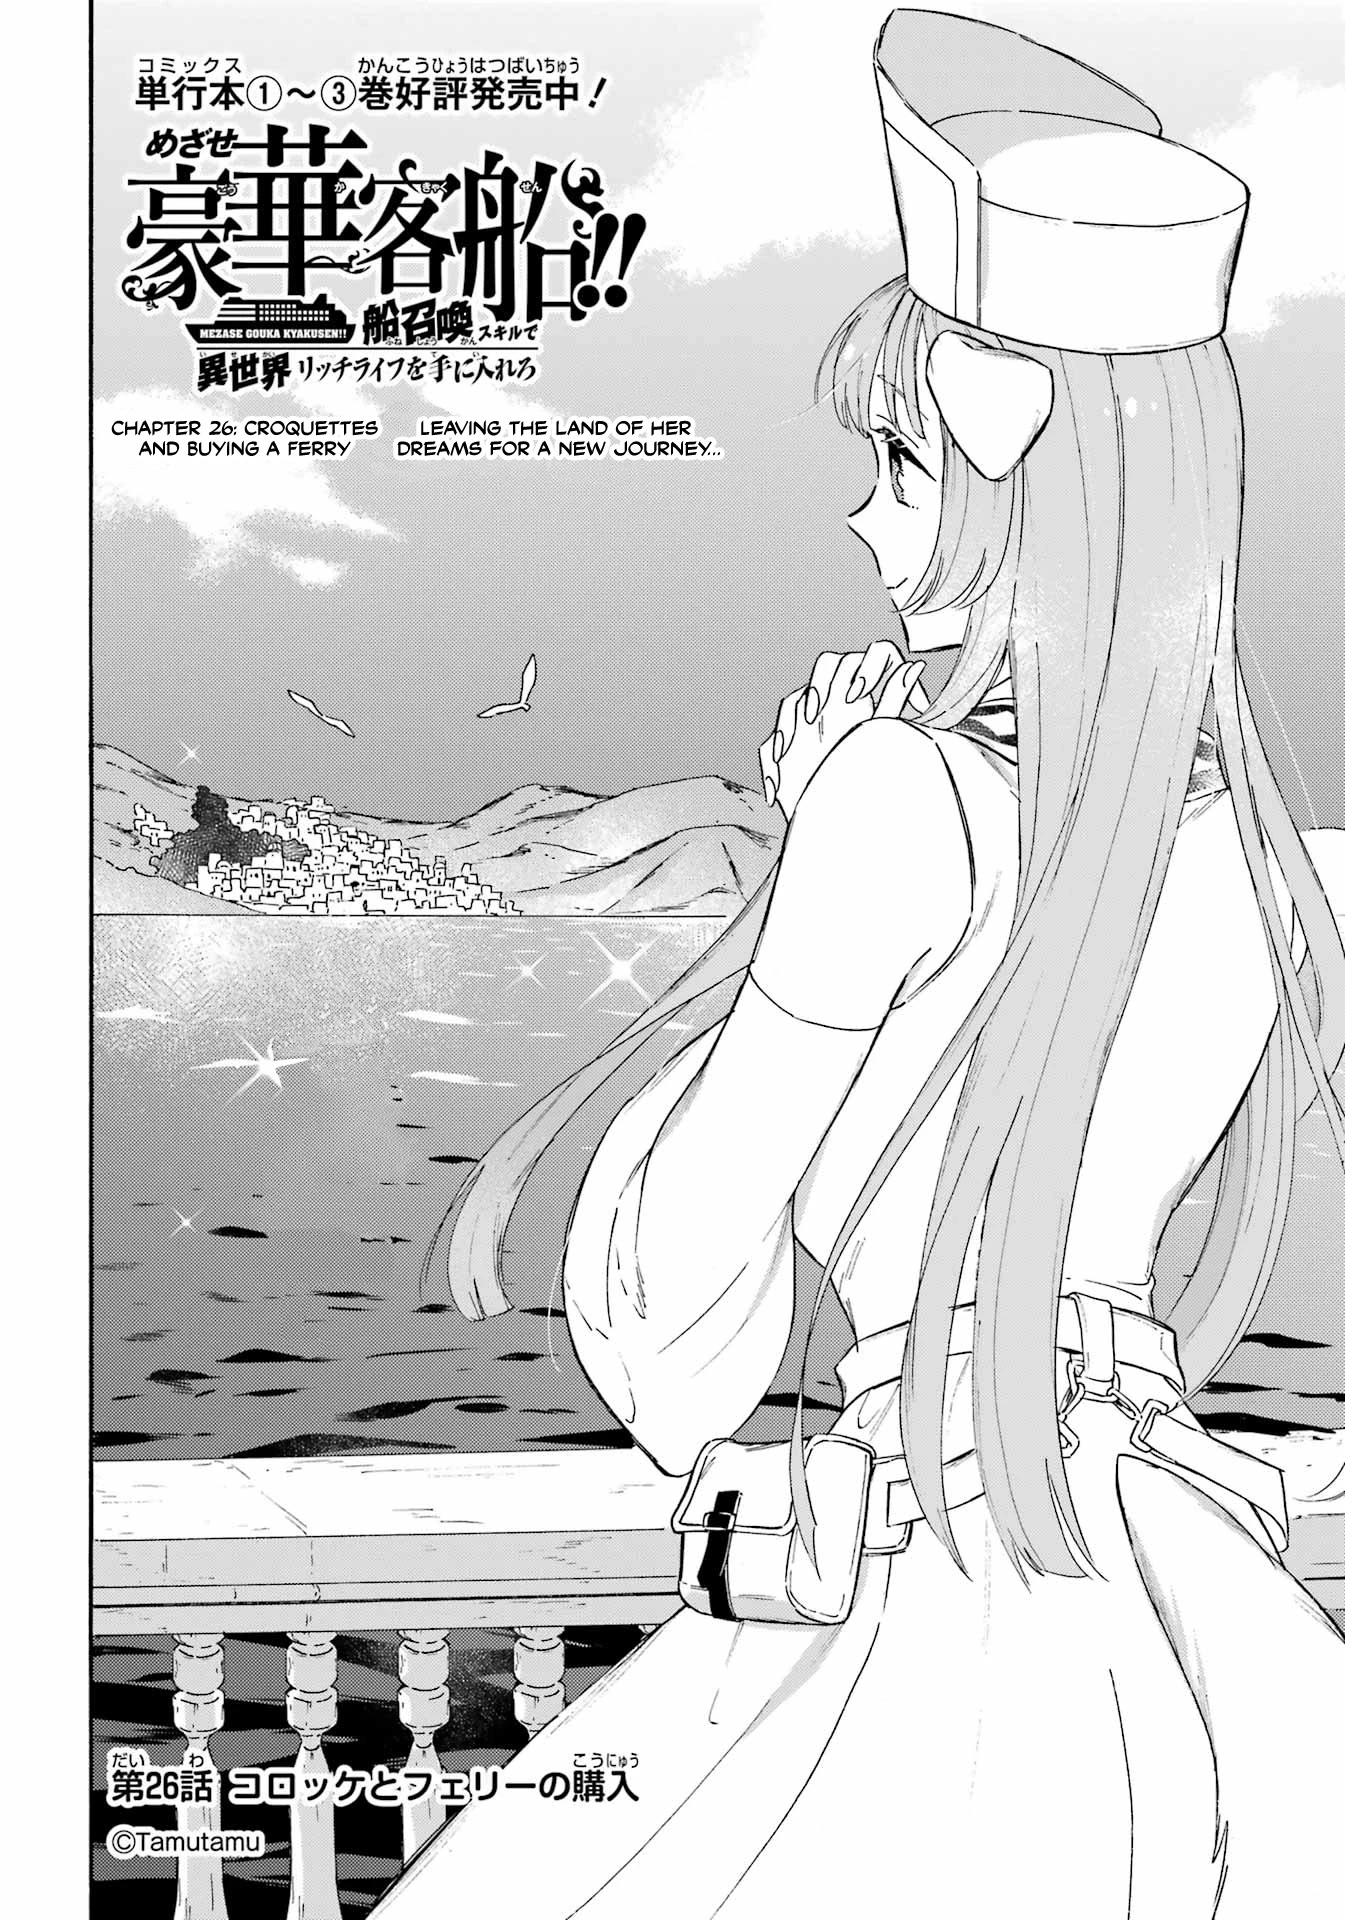 Striving For The Luxury Liner!! ~Get That Rich Isekai Life With A Ship Summoning Skill~ - chapter 26 - #2